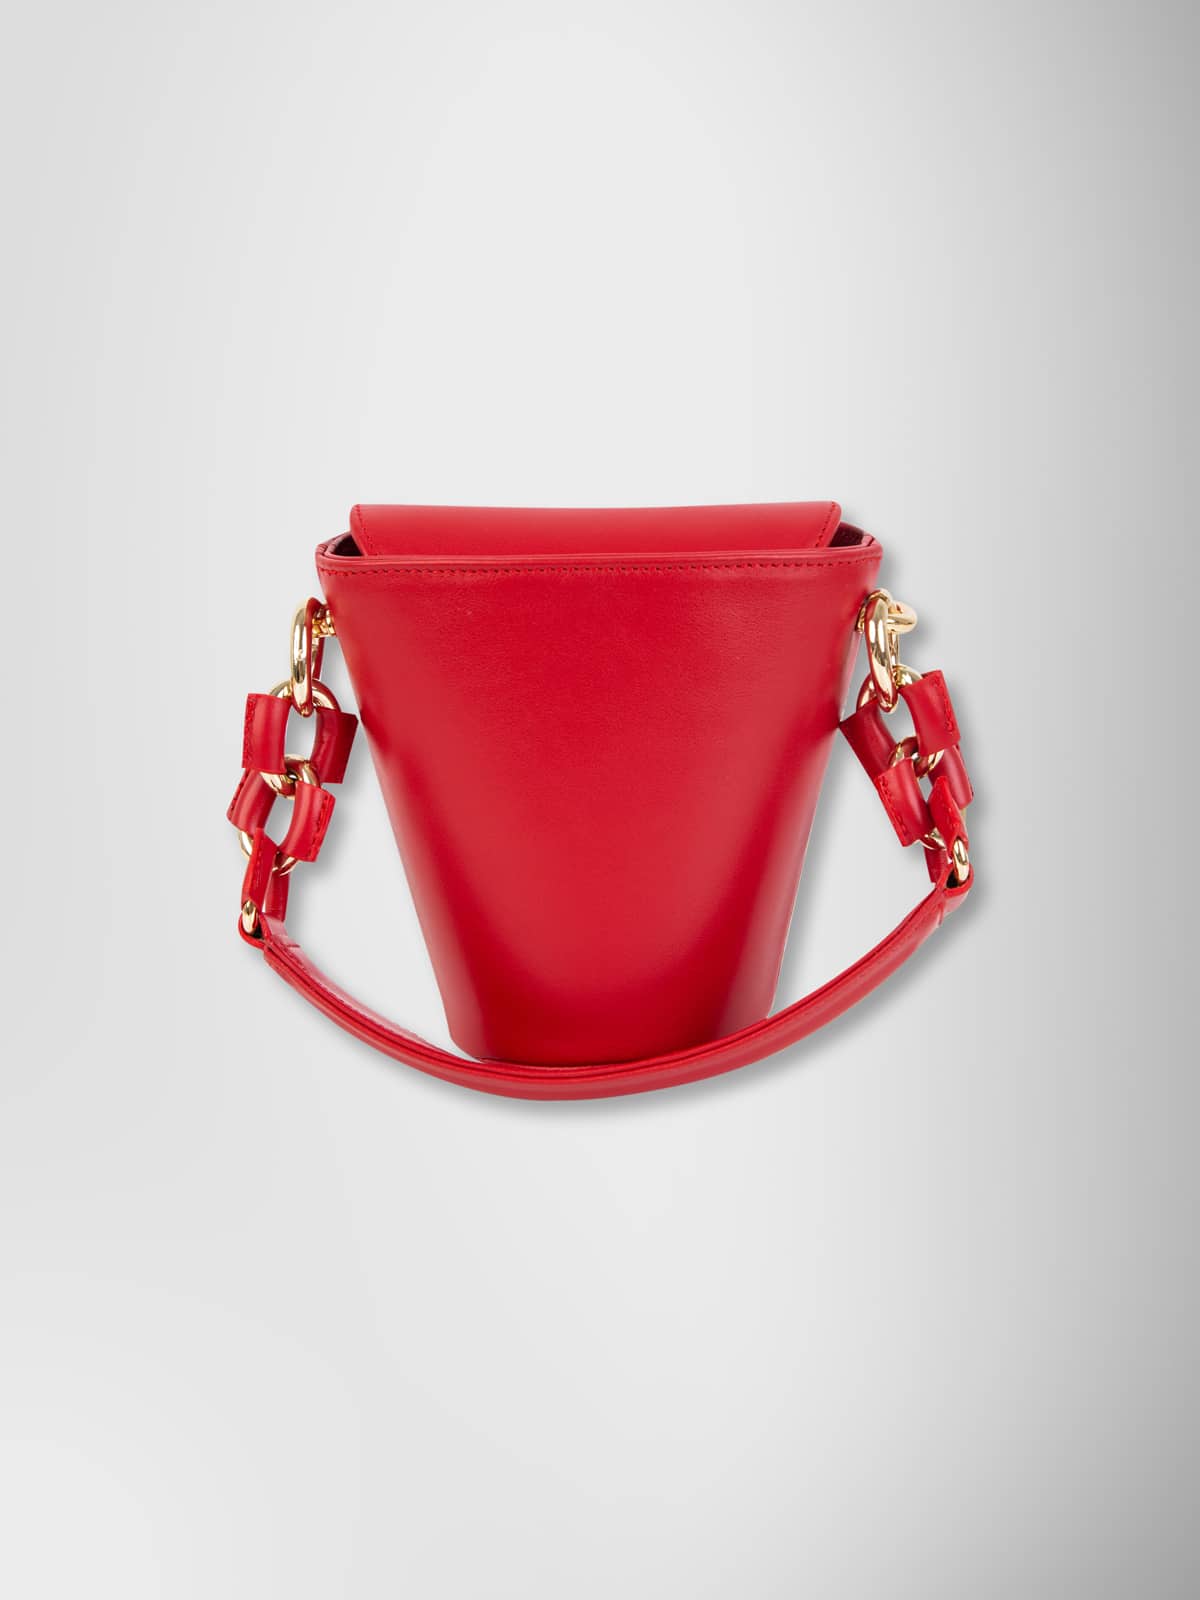 MARGOT BAG SMALL RED